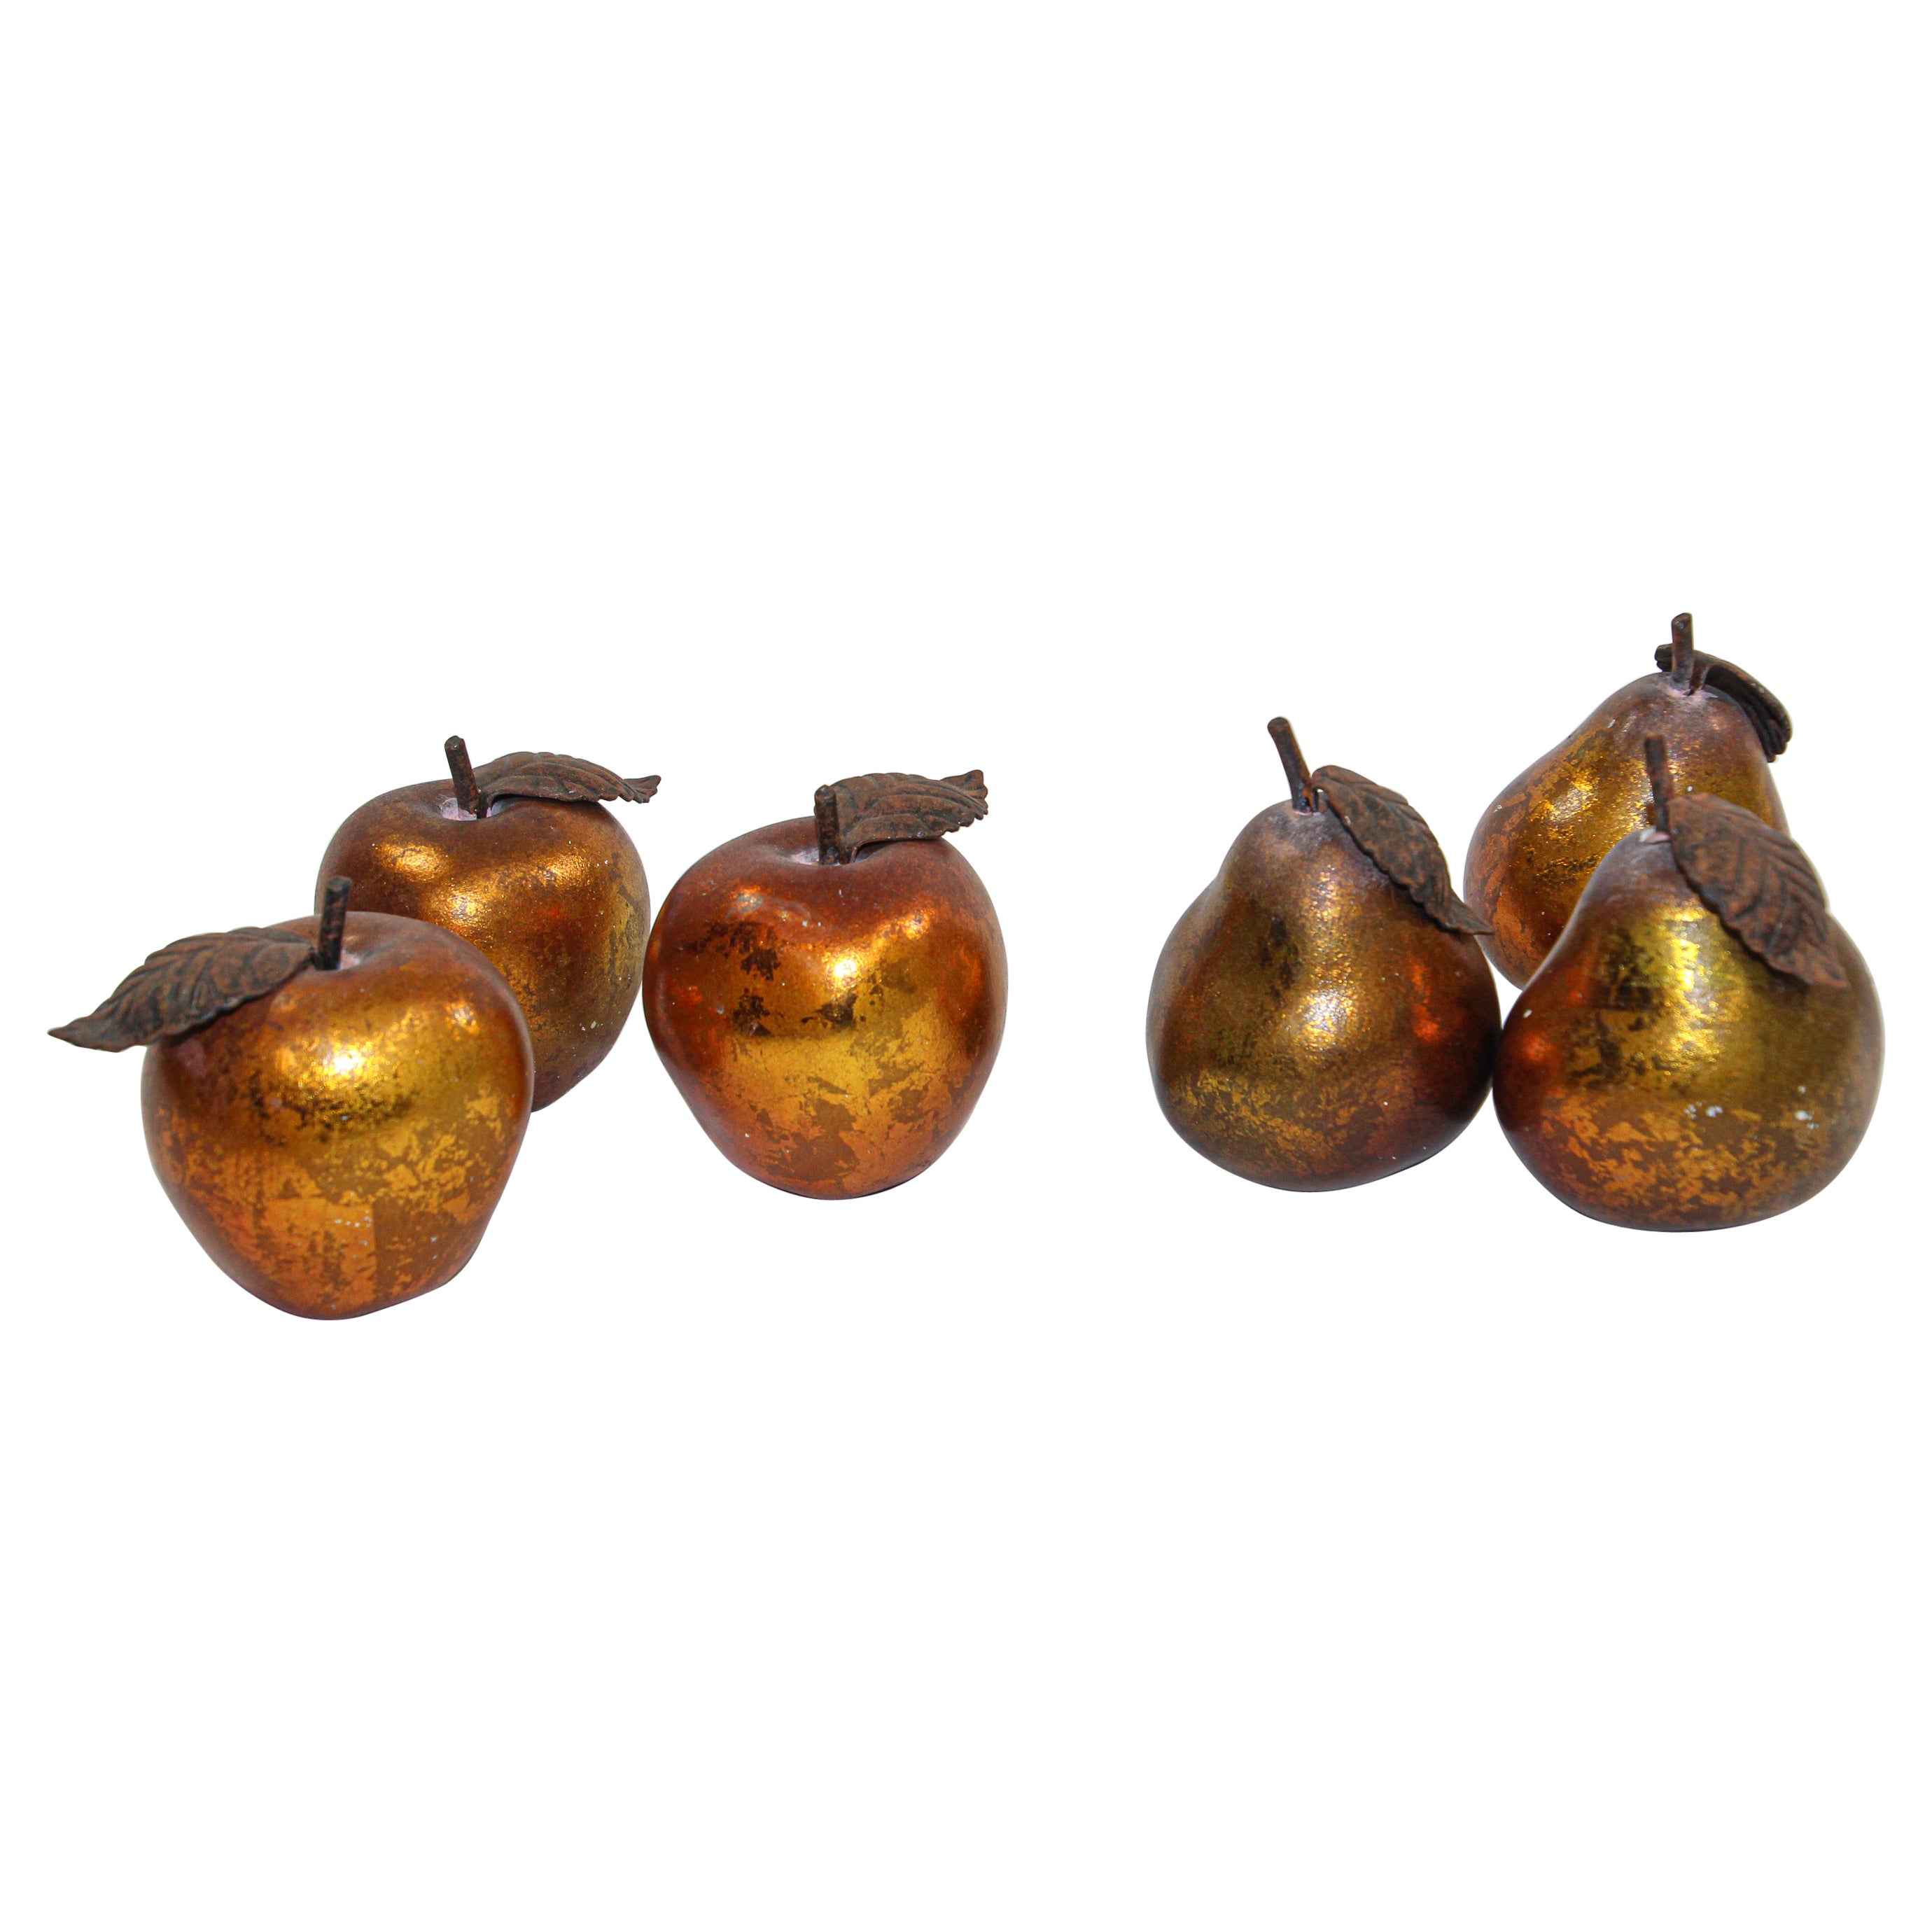 Vintage Decorative Pears and Apples Gilted Metal Set of Six